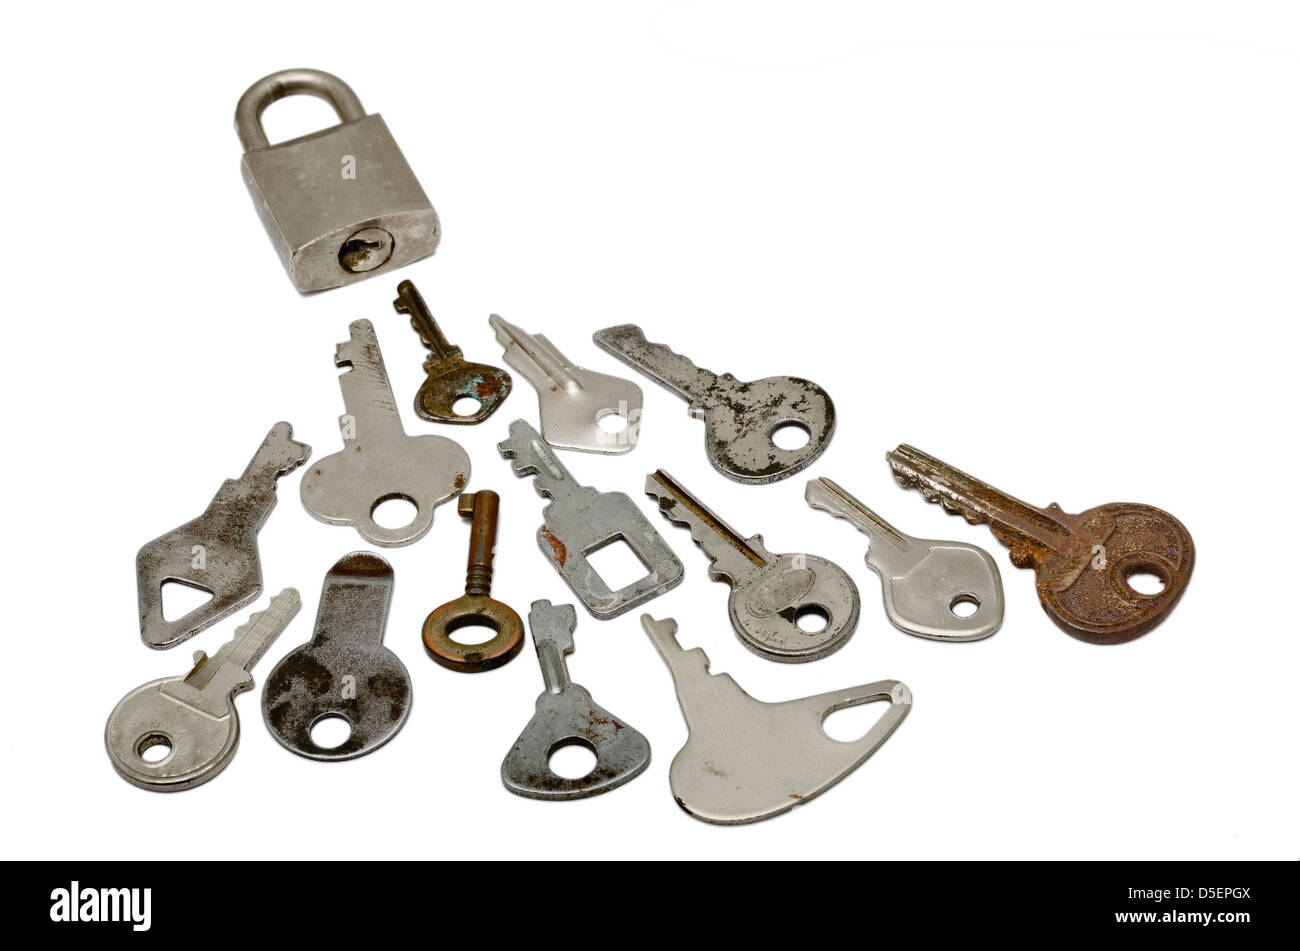 A Locked with many wrong Keys. over white background Stock Photo